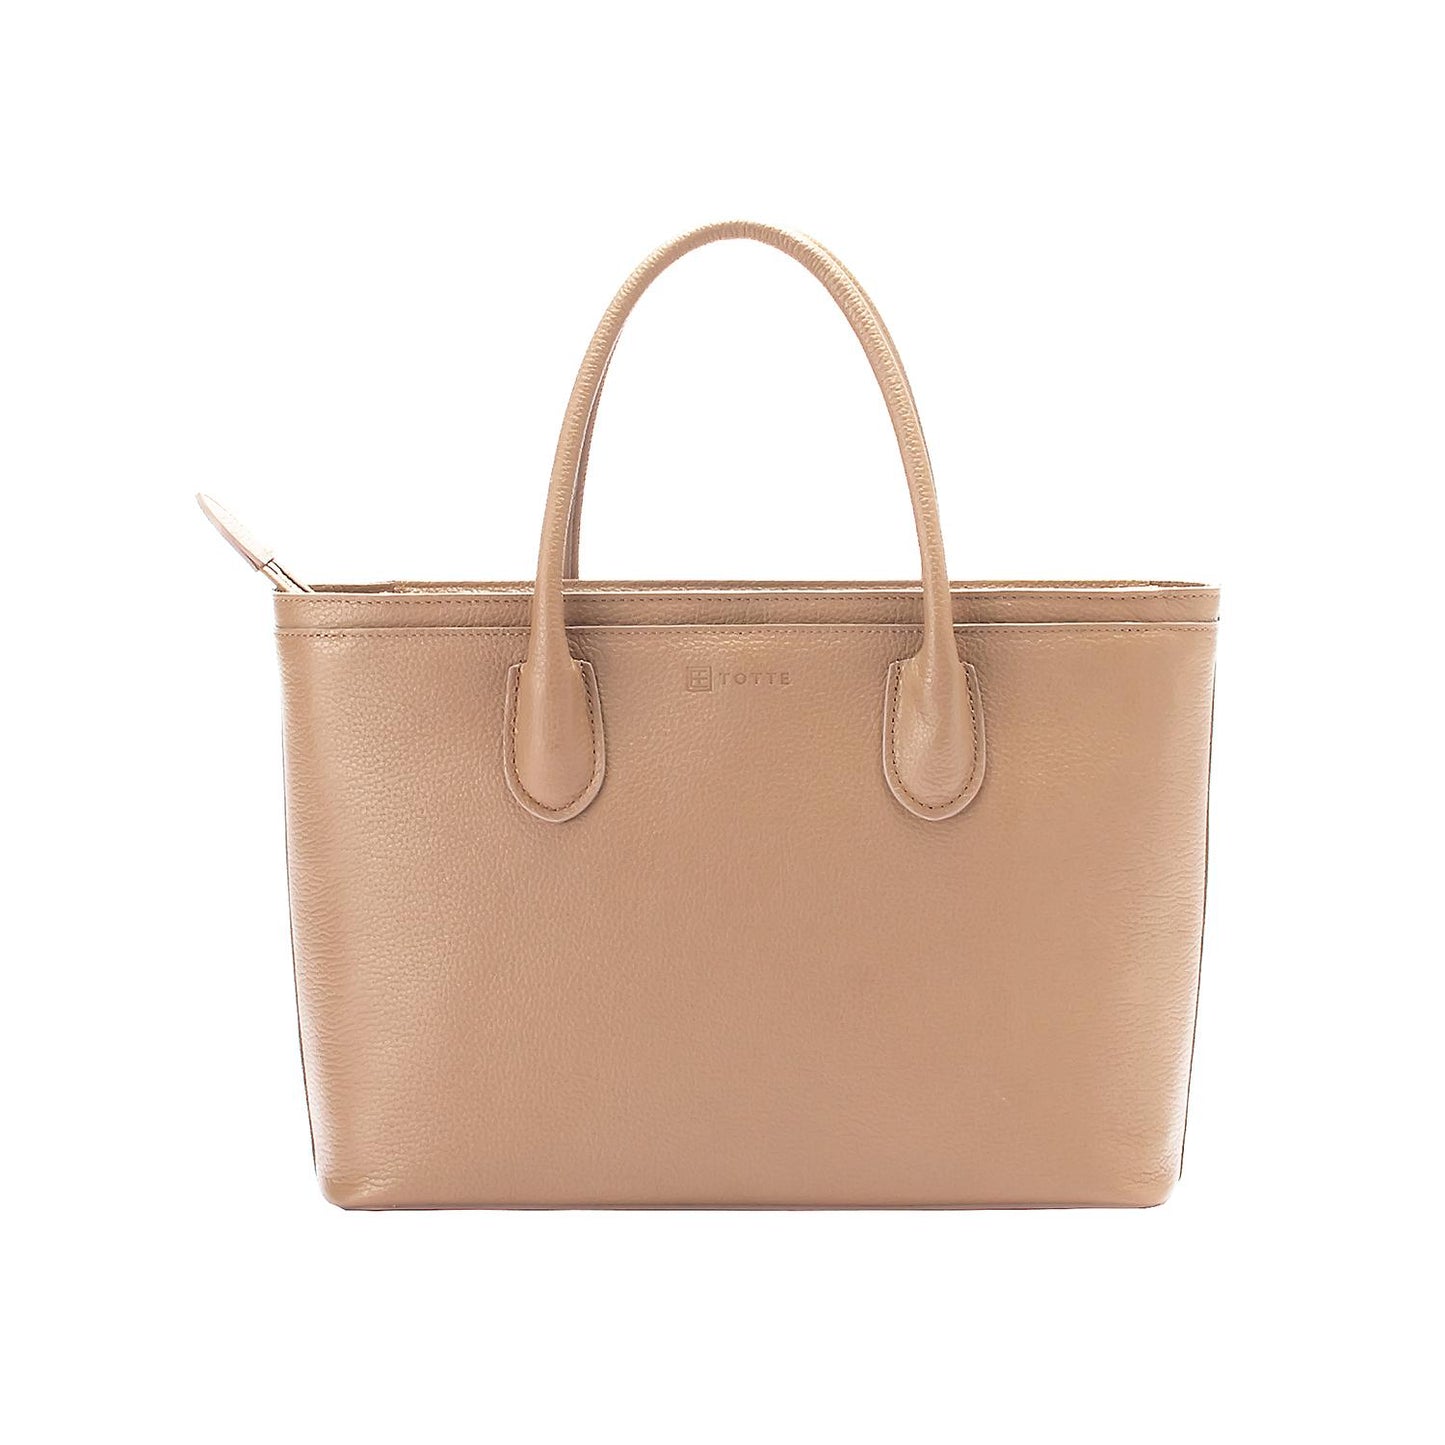 TOTTE Shulink Tote